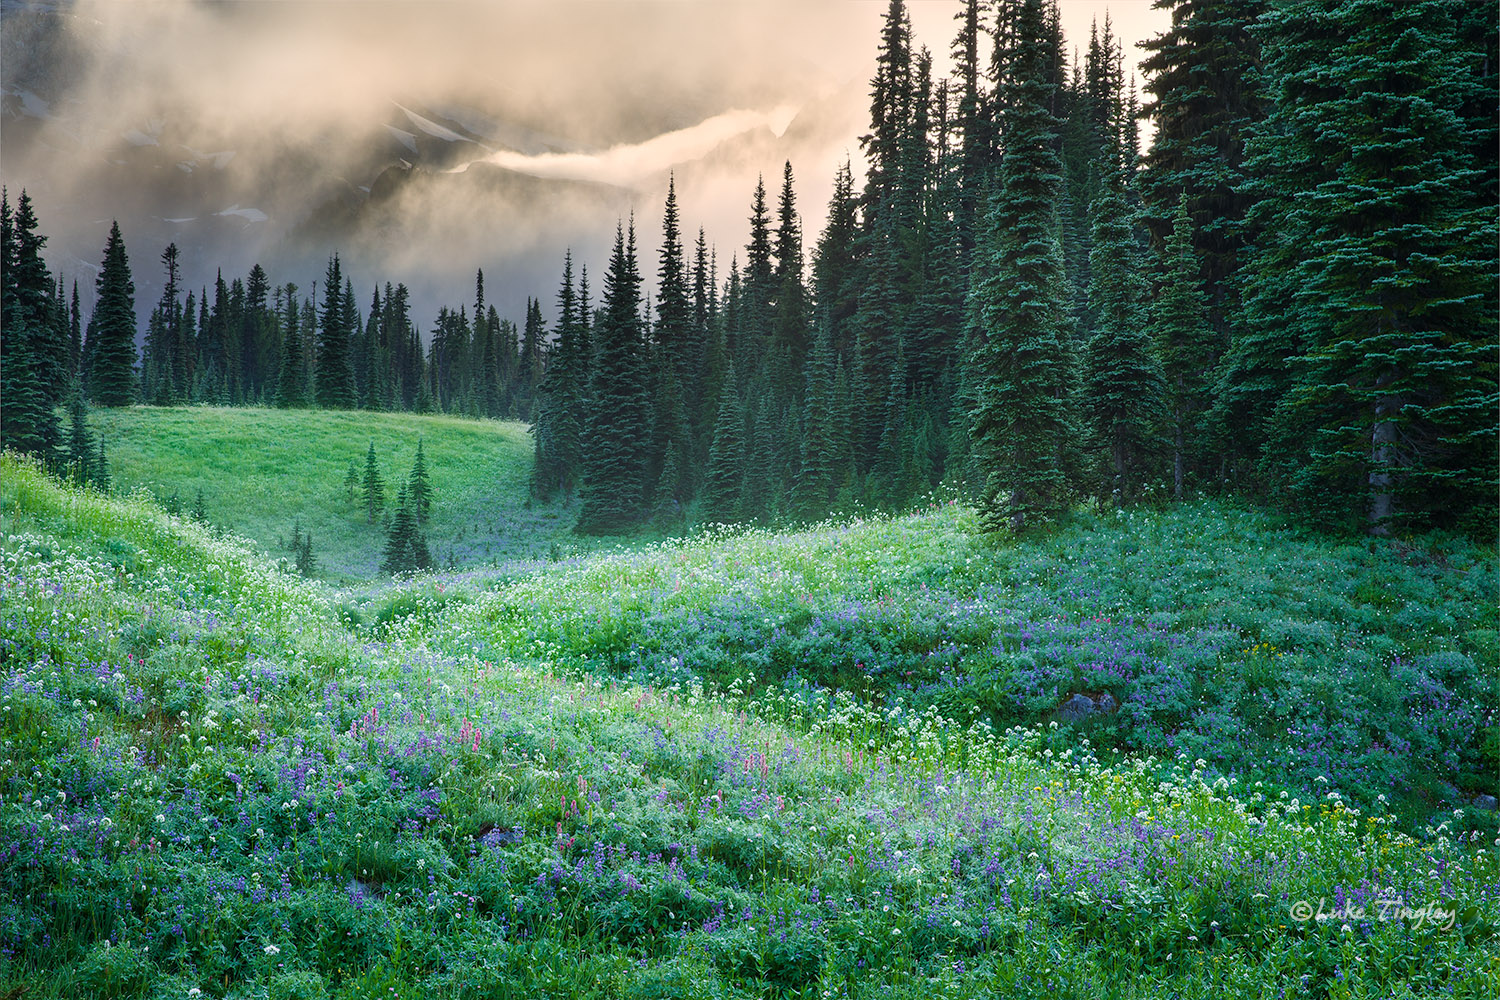 I was fortunate enough to score a cross country zone permit.  Morning light plays off the fog and the wildflower covered meadows...